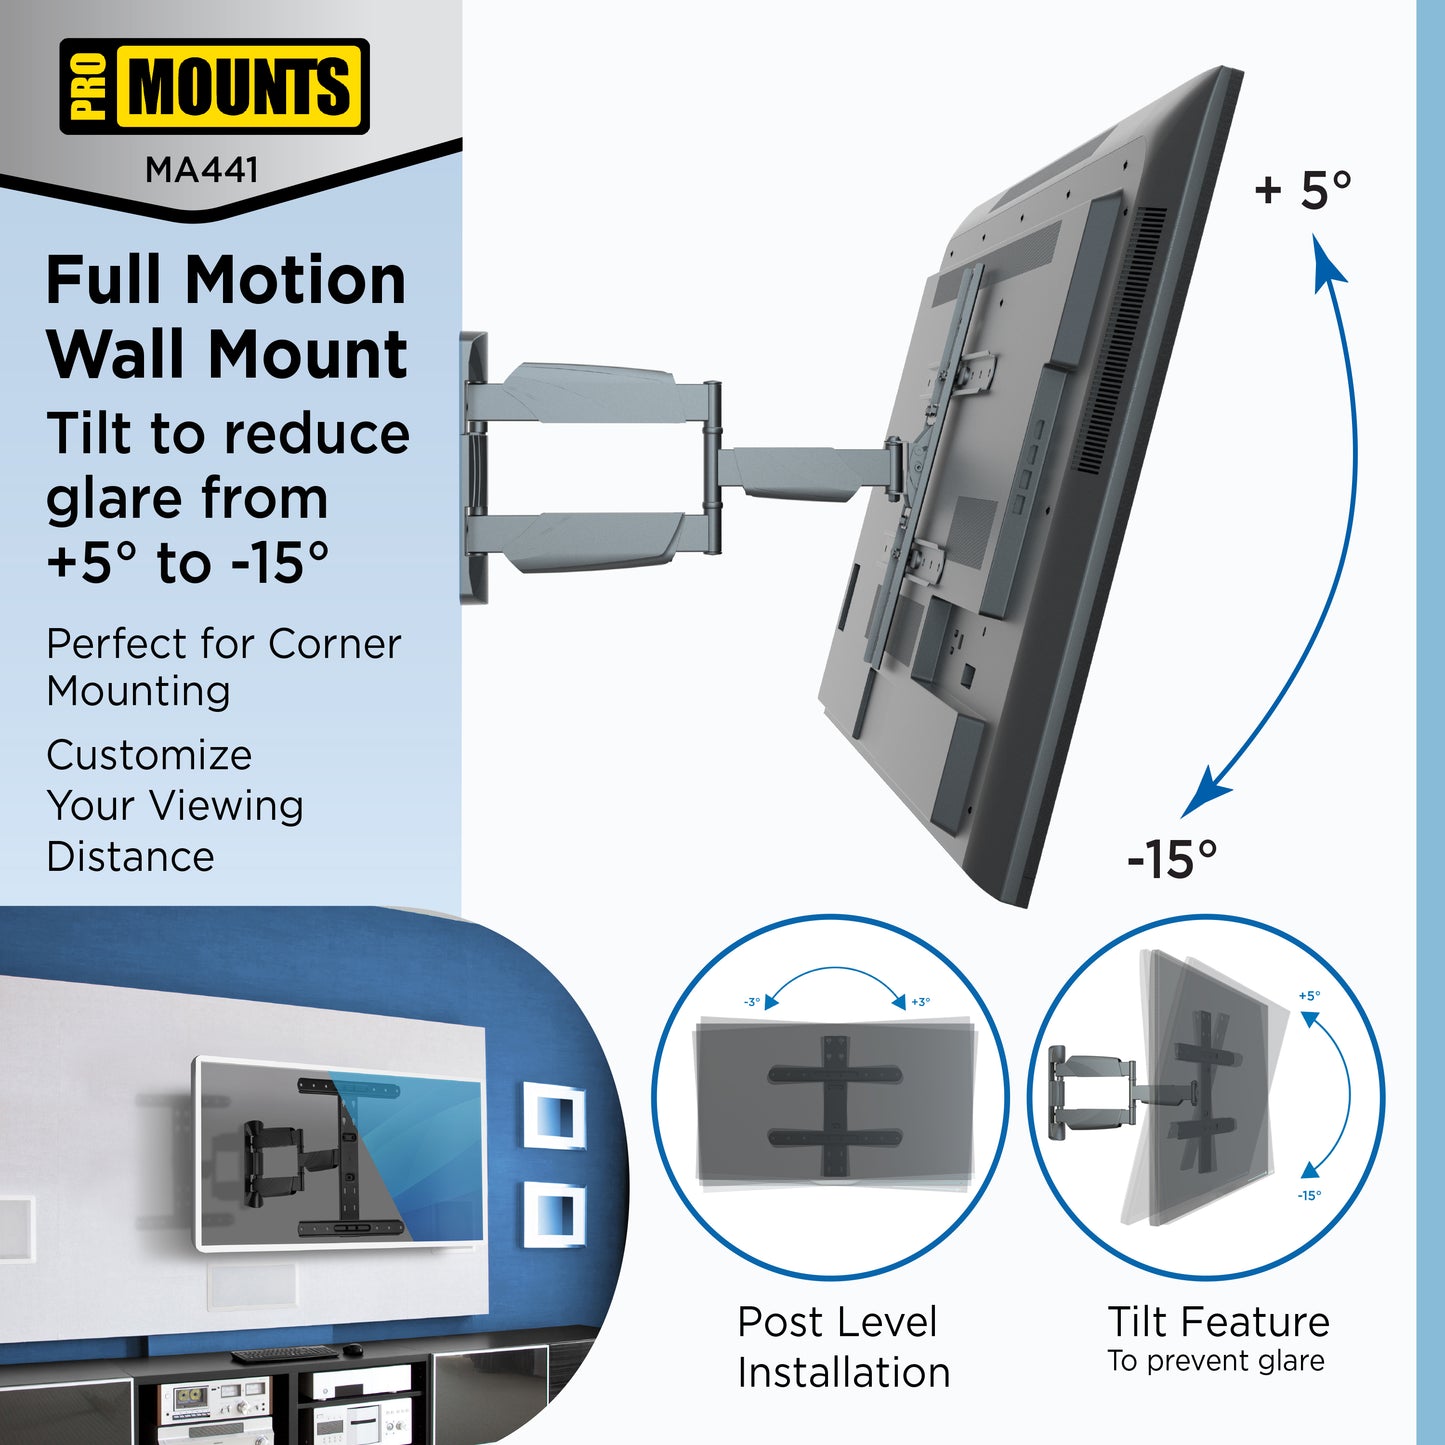 ProMounts Articulatin / Full Motion TV Wall Mount for 32”-60” Holds up to 70lbs (MA441)